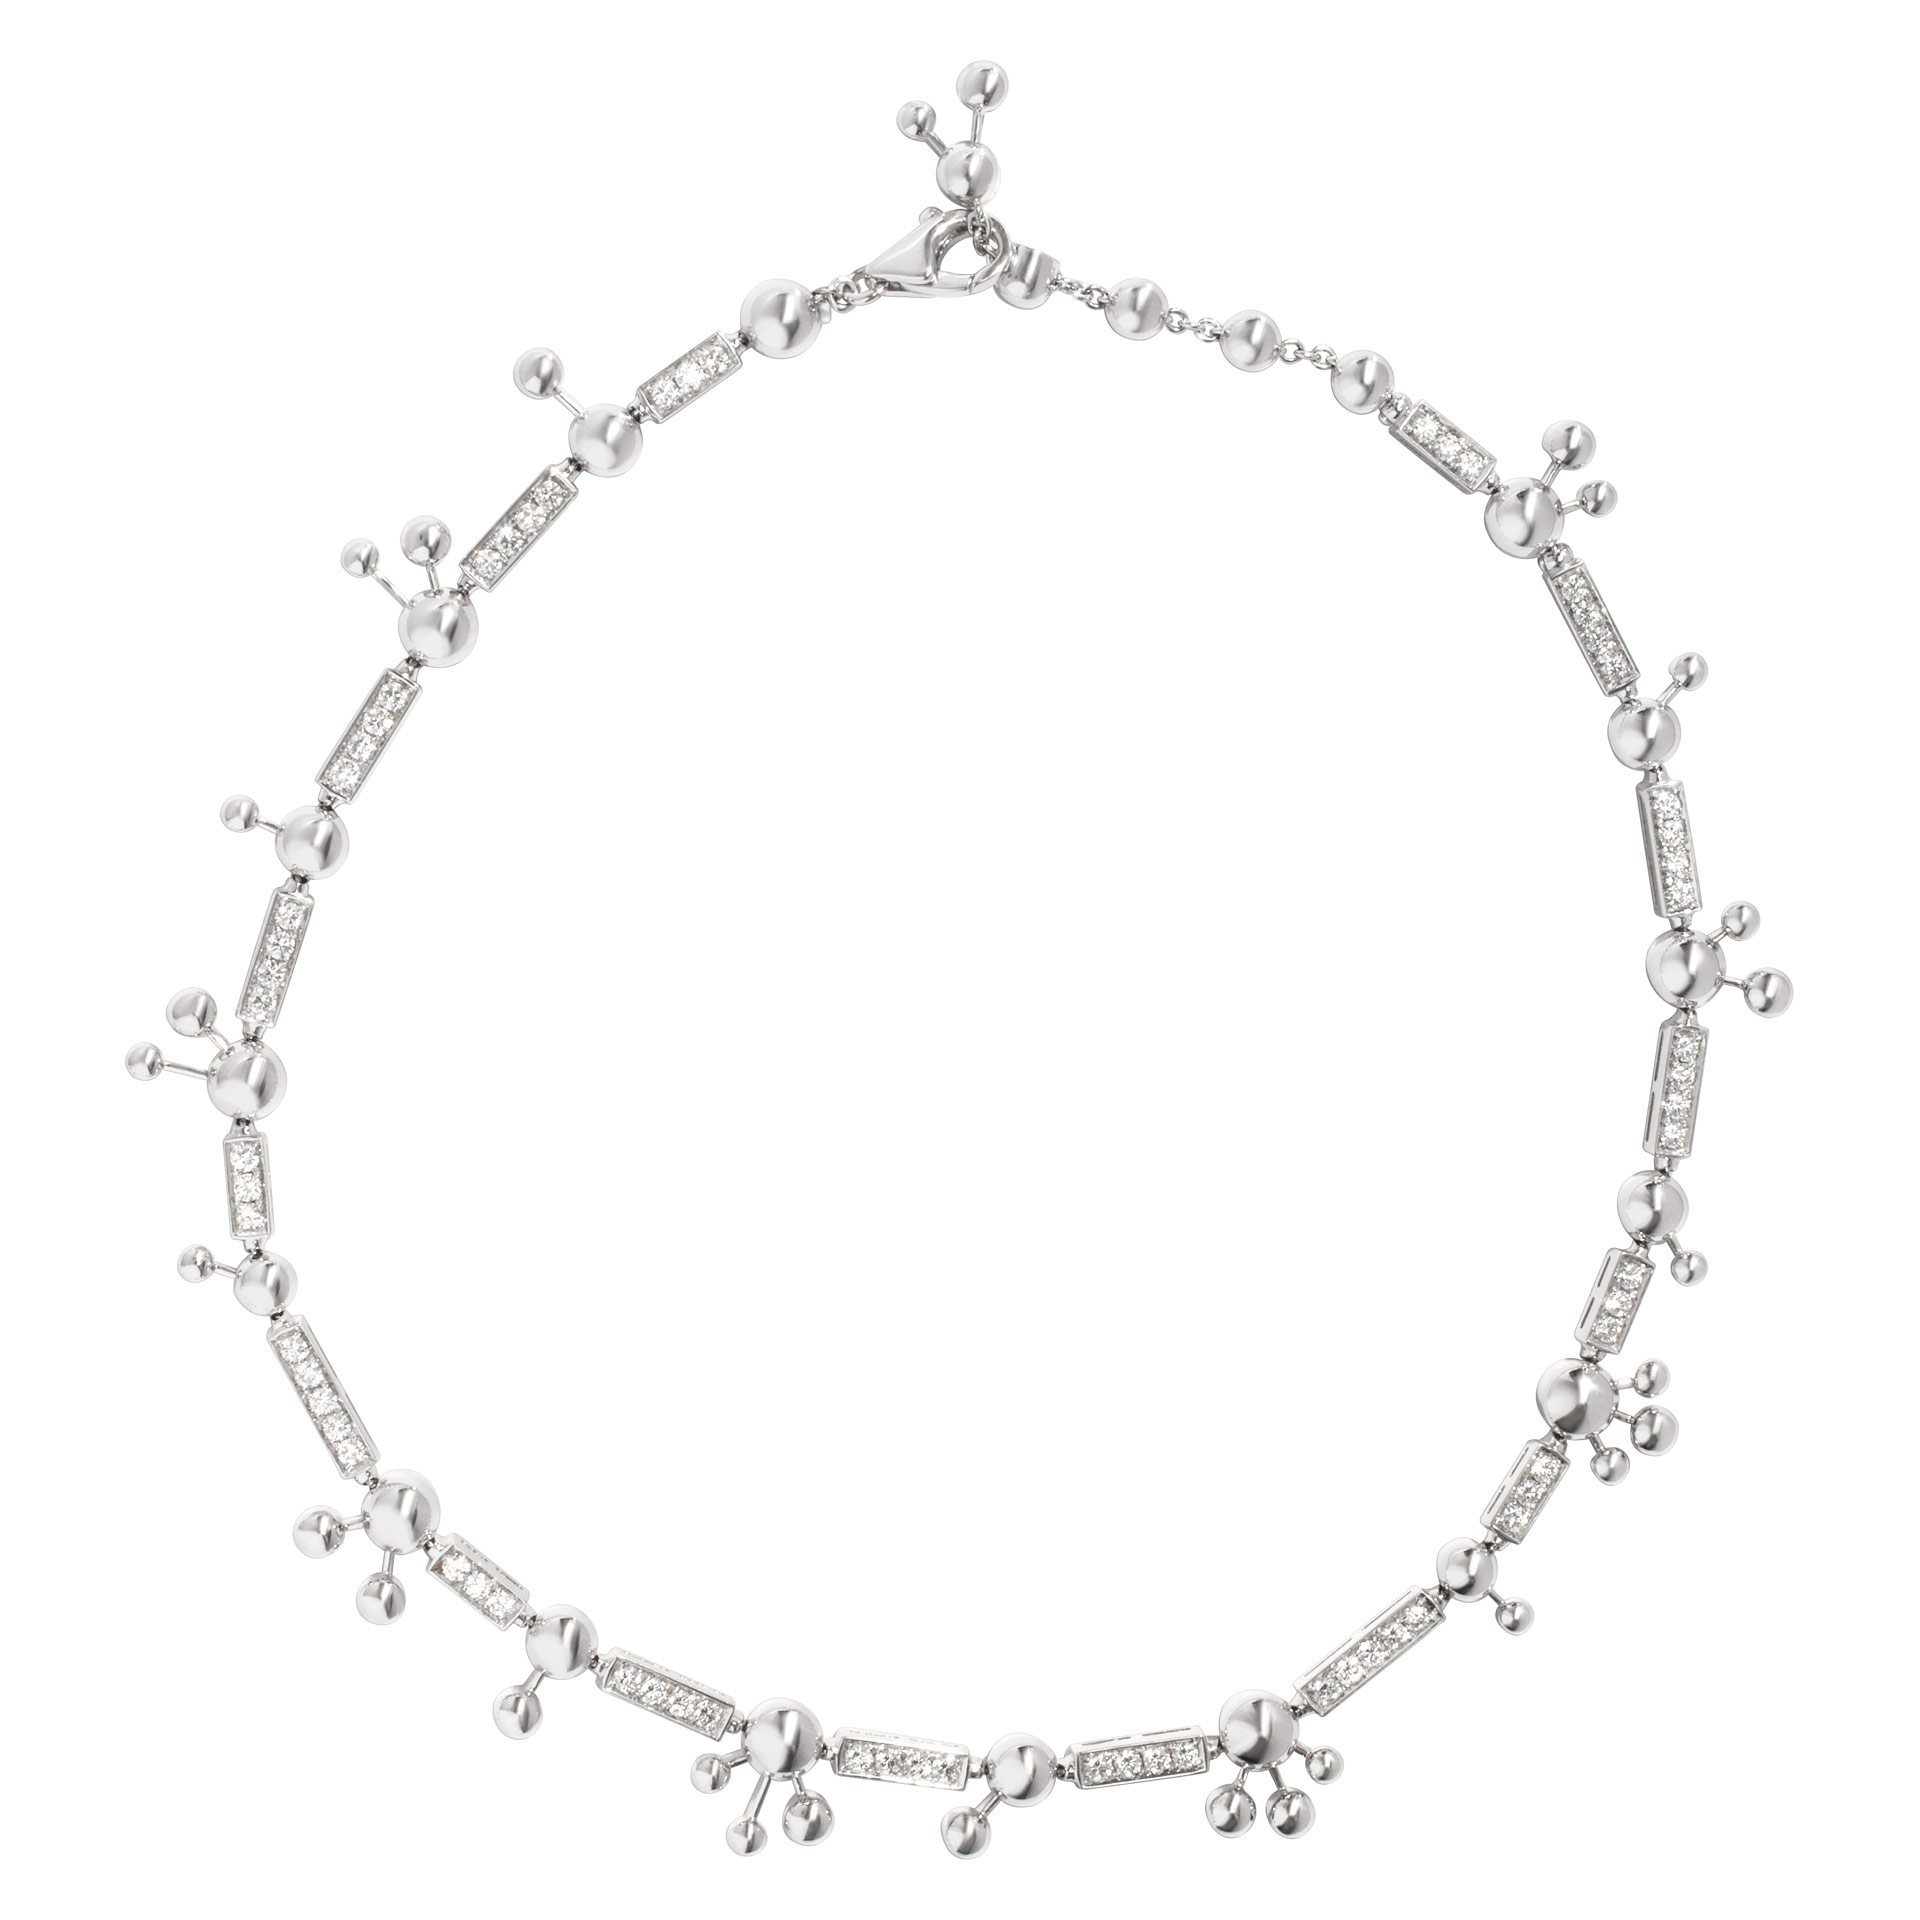 Bvlgari "Astrale" necklace in 18k white gold with over 3.48 carats in E-F color, VS clarity diamonds